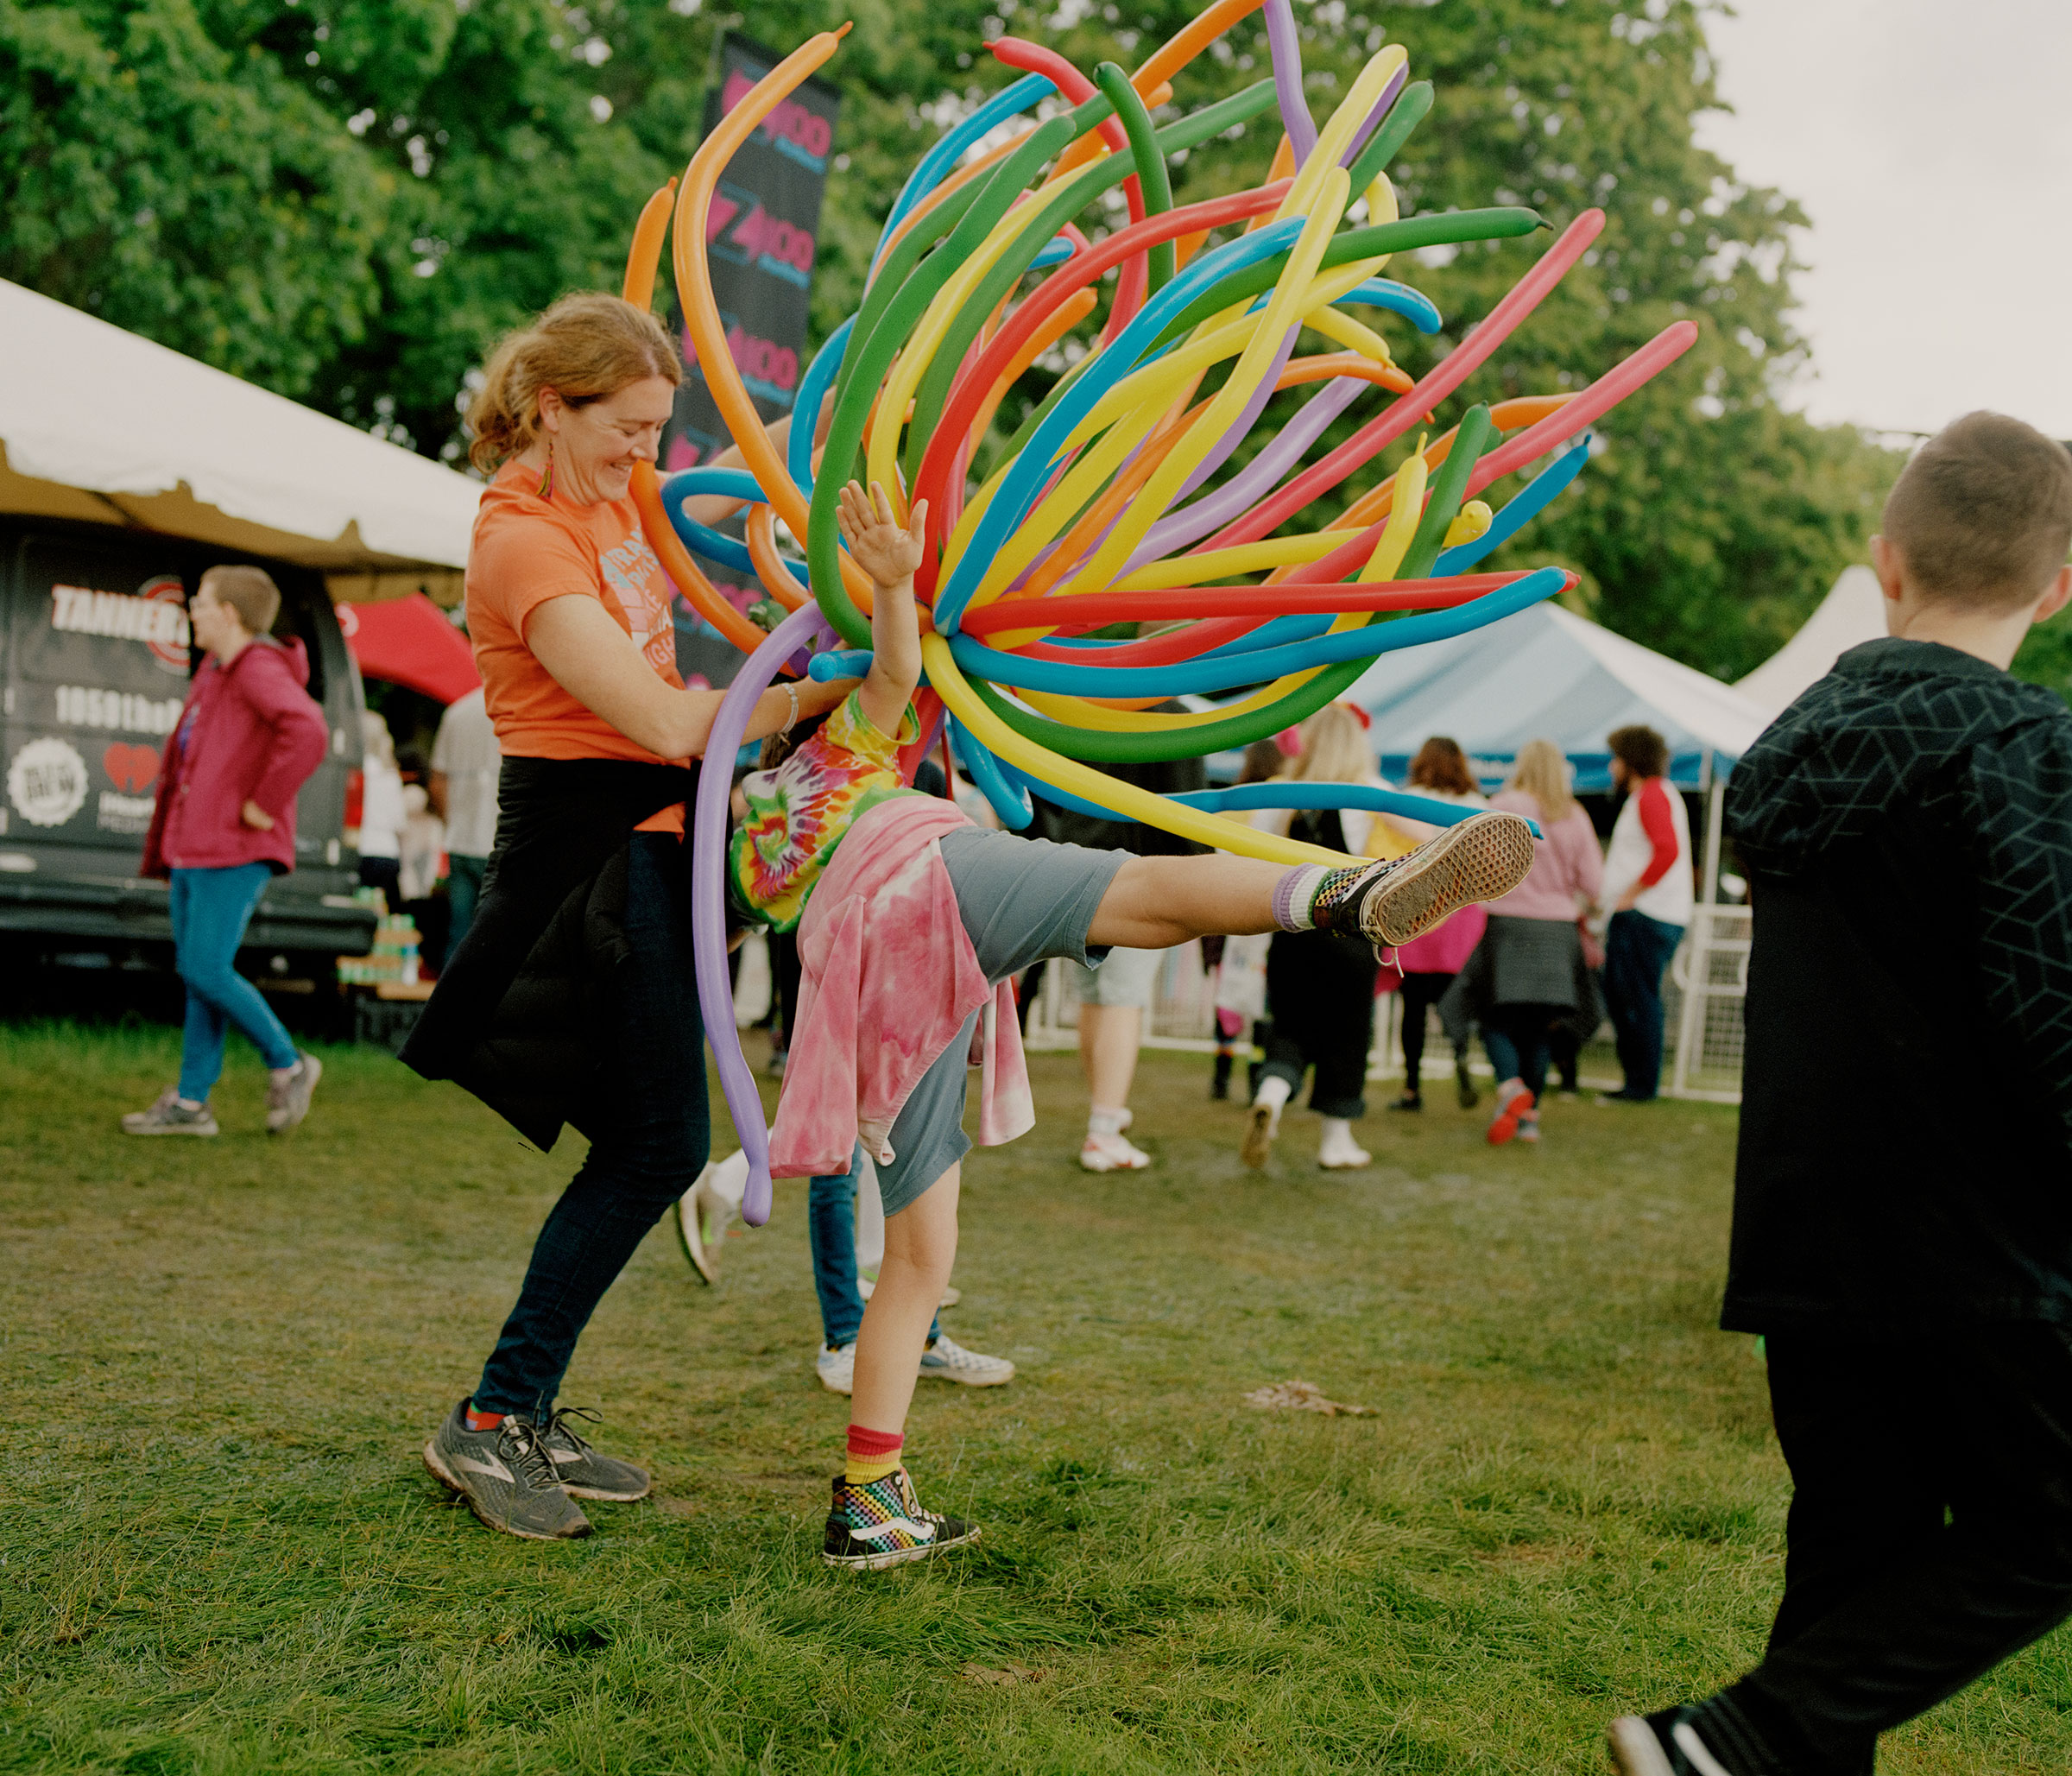 Karen and her kids play with balloons at Portland’s Pride festival on June 19, 2022. (Ricardo Nagaoka for TIME)